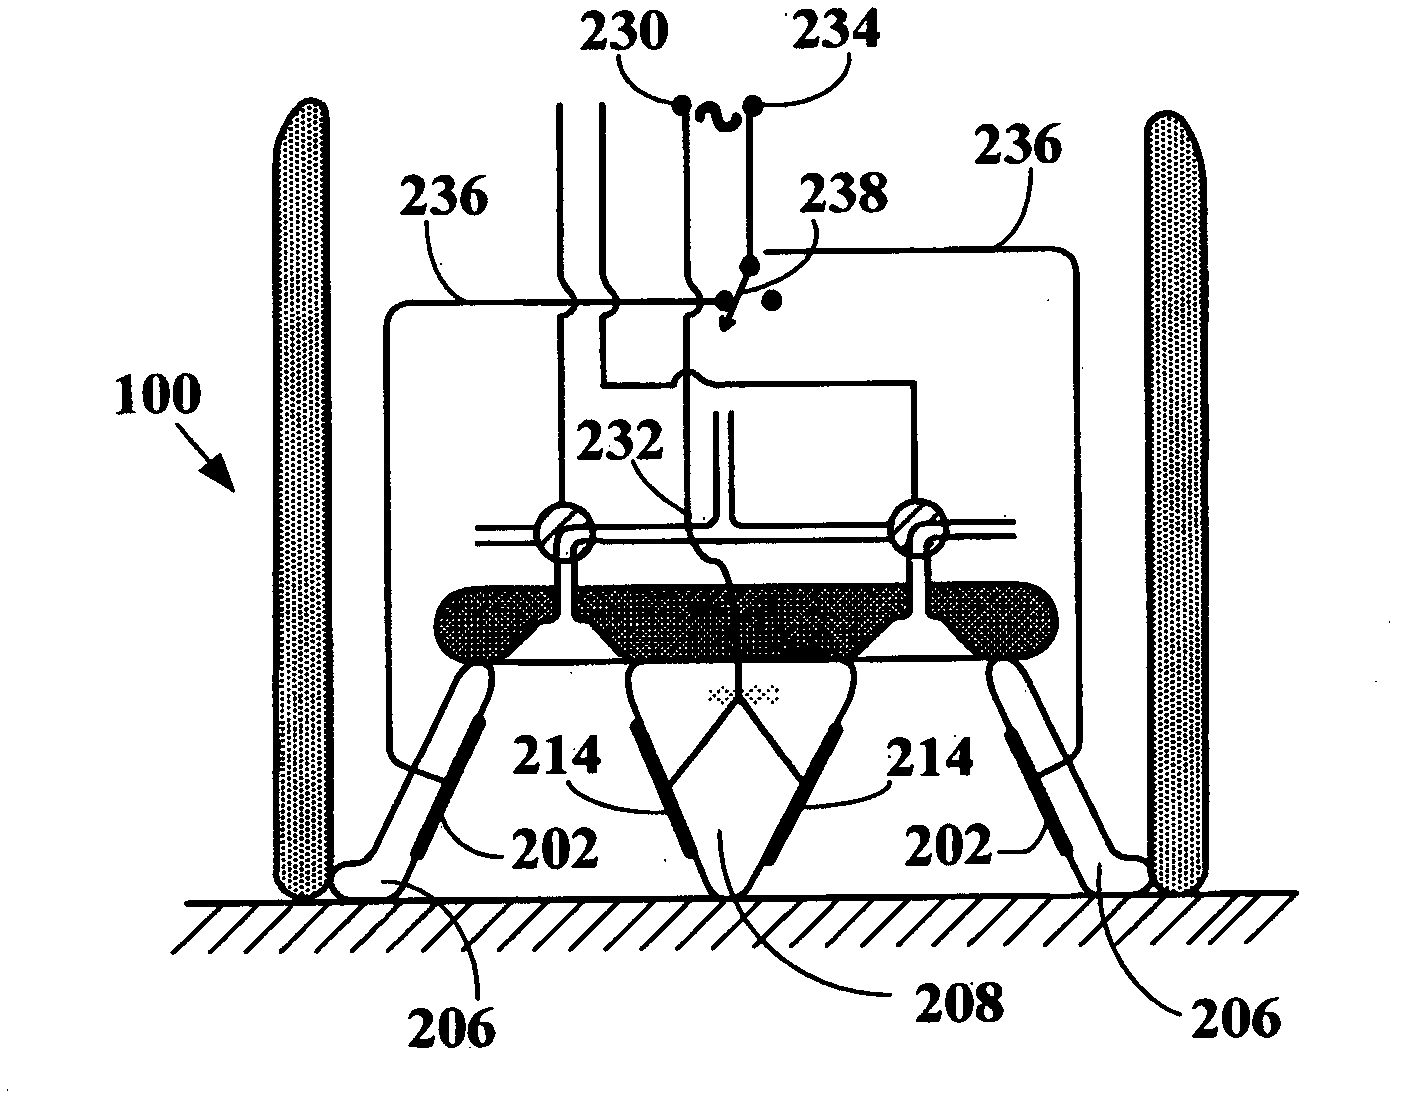 Method and apparatus for non- invasive aesthetic treatment of skin and sub-dermis.